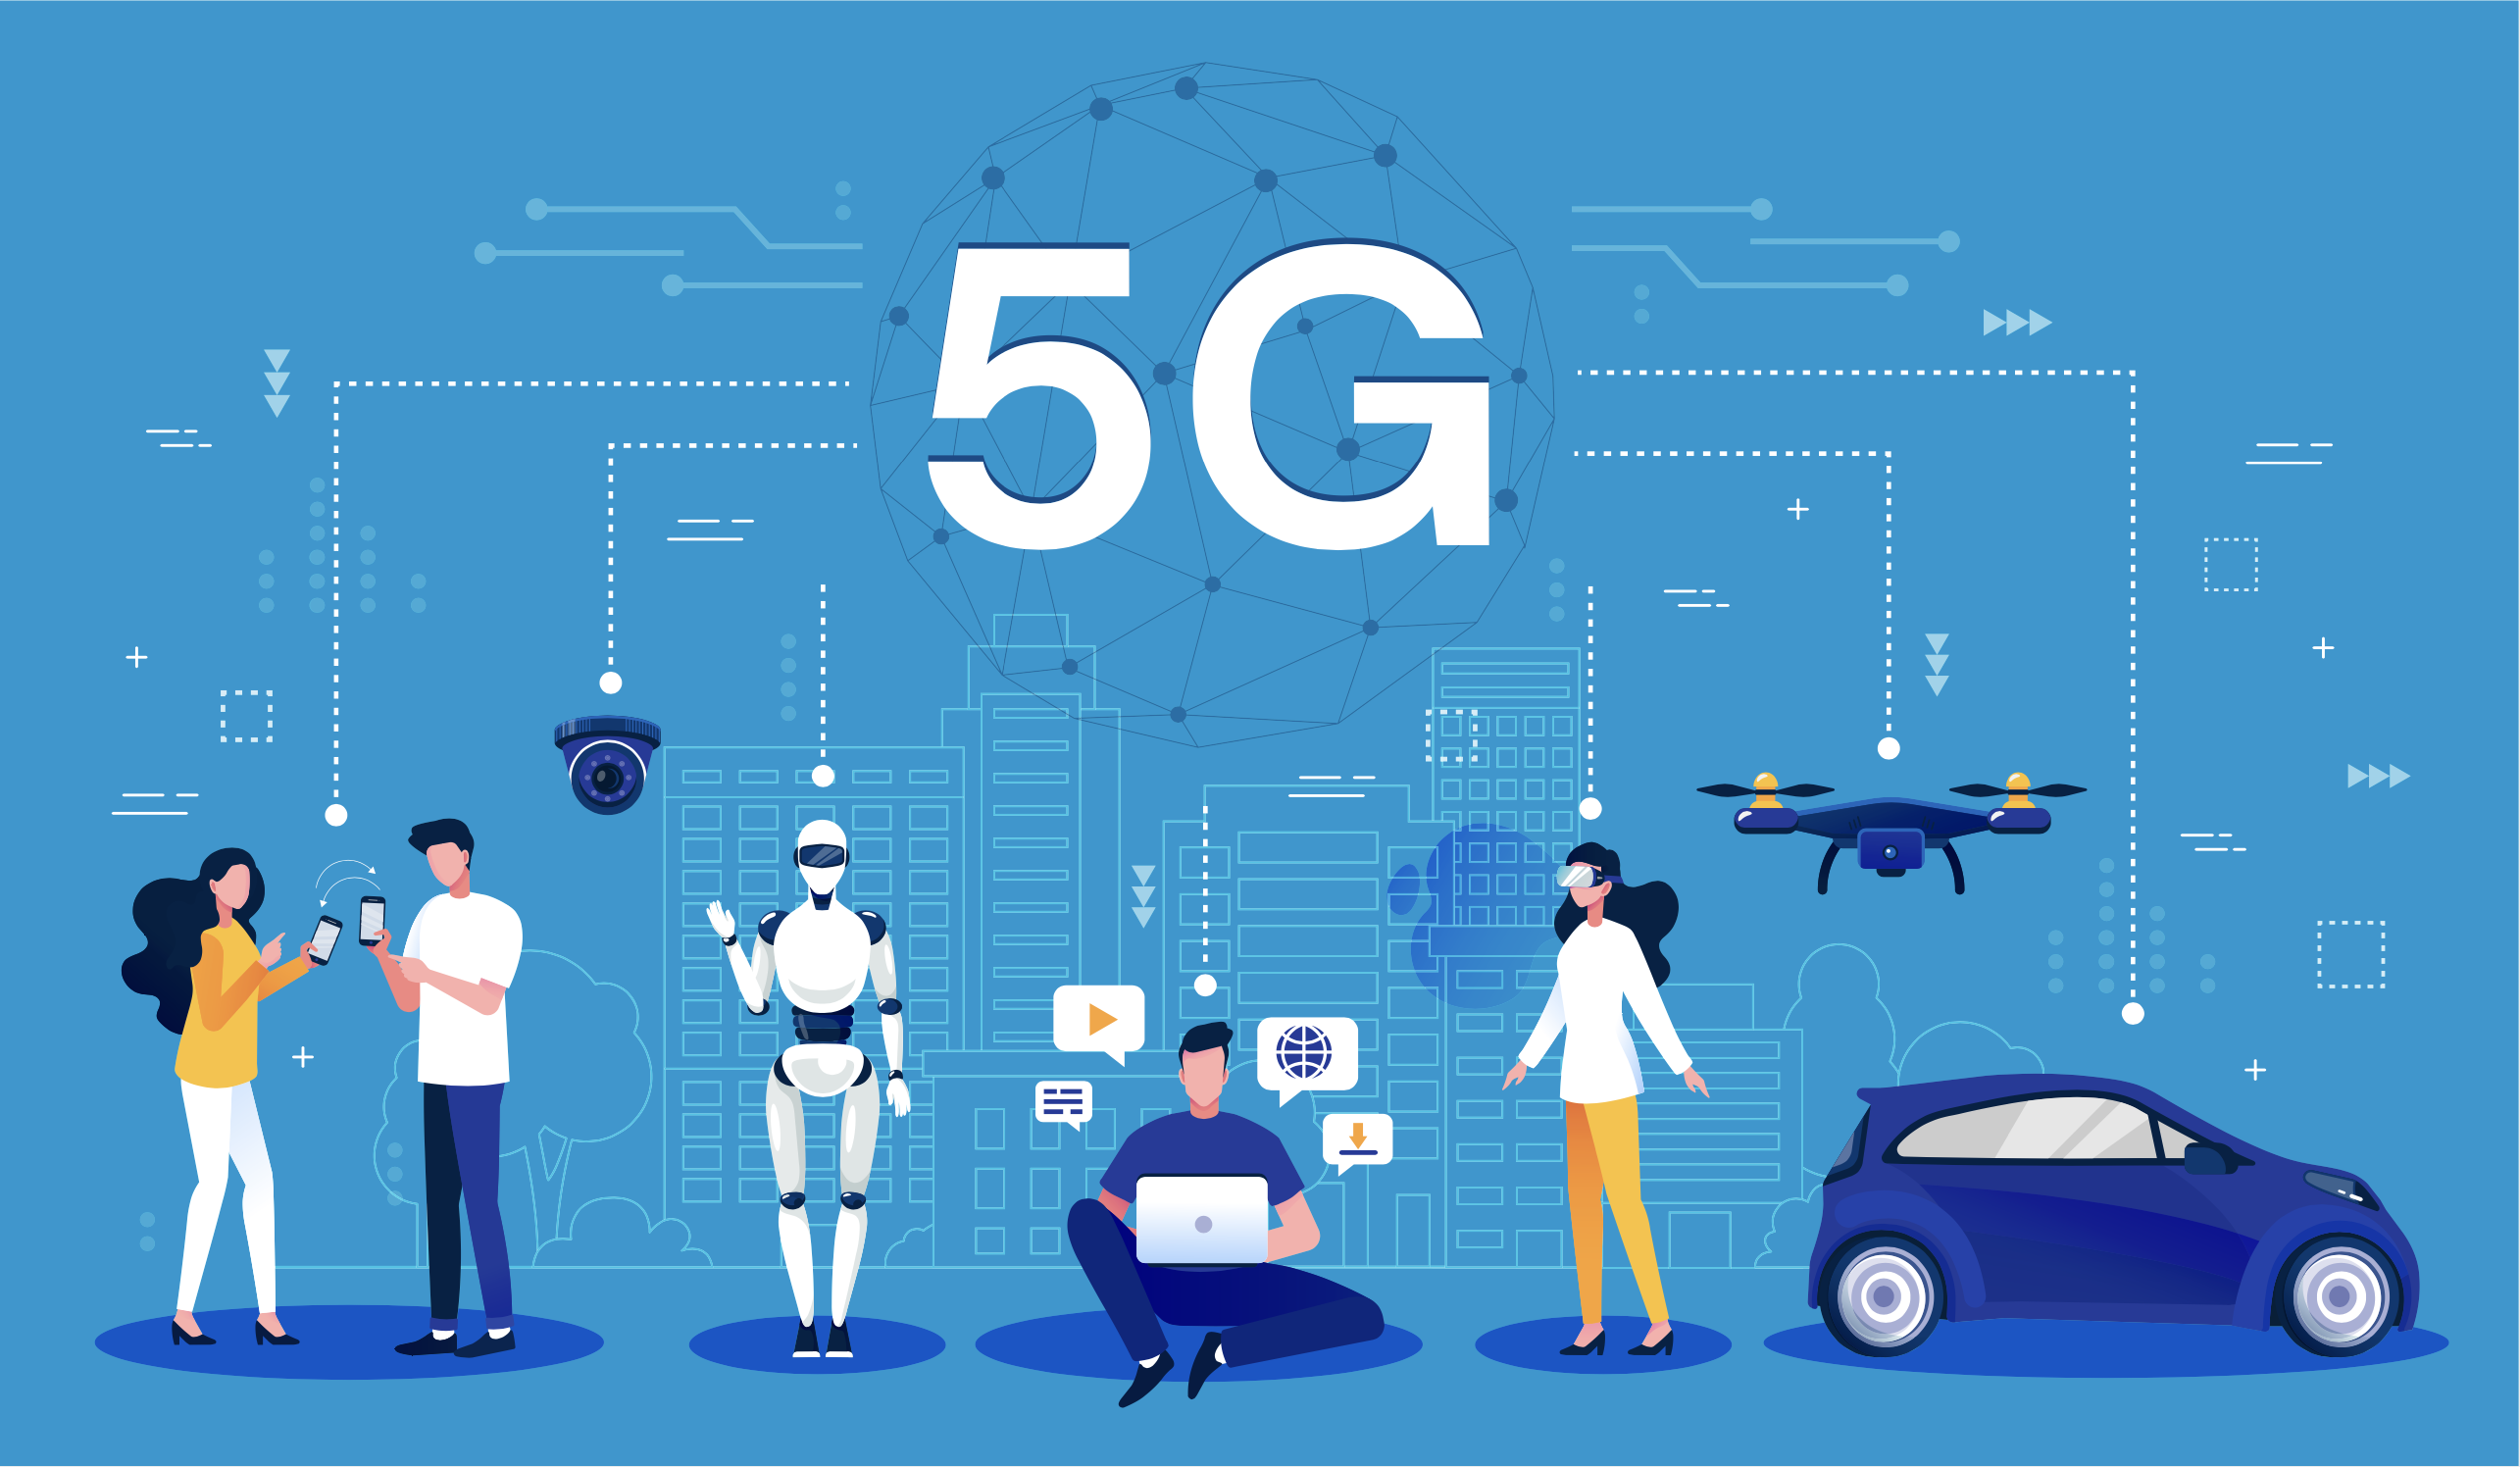 What’s The Deal With 5G?